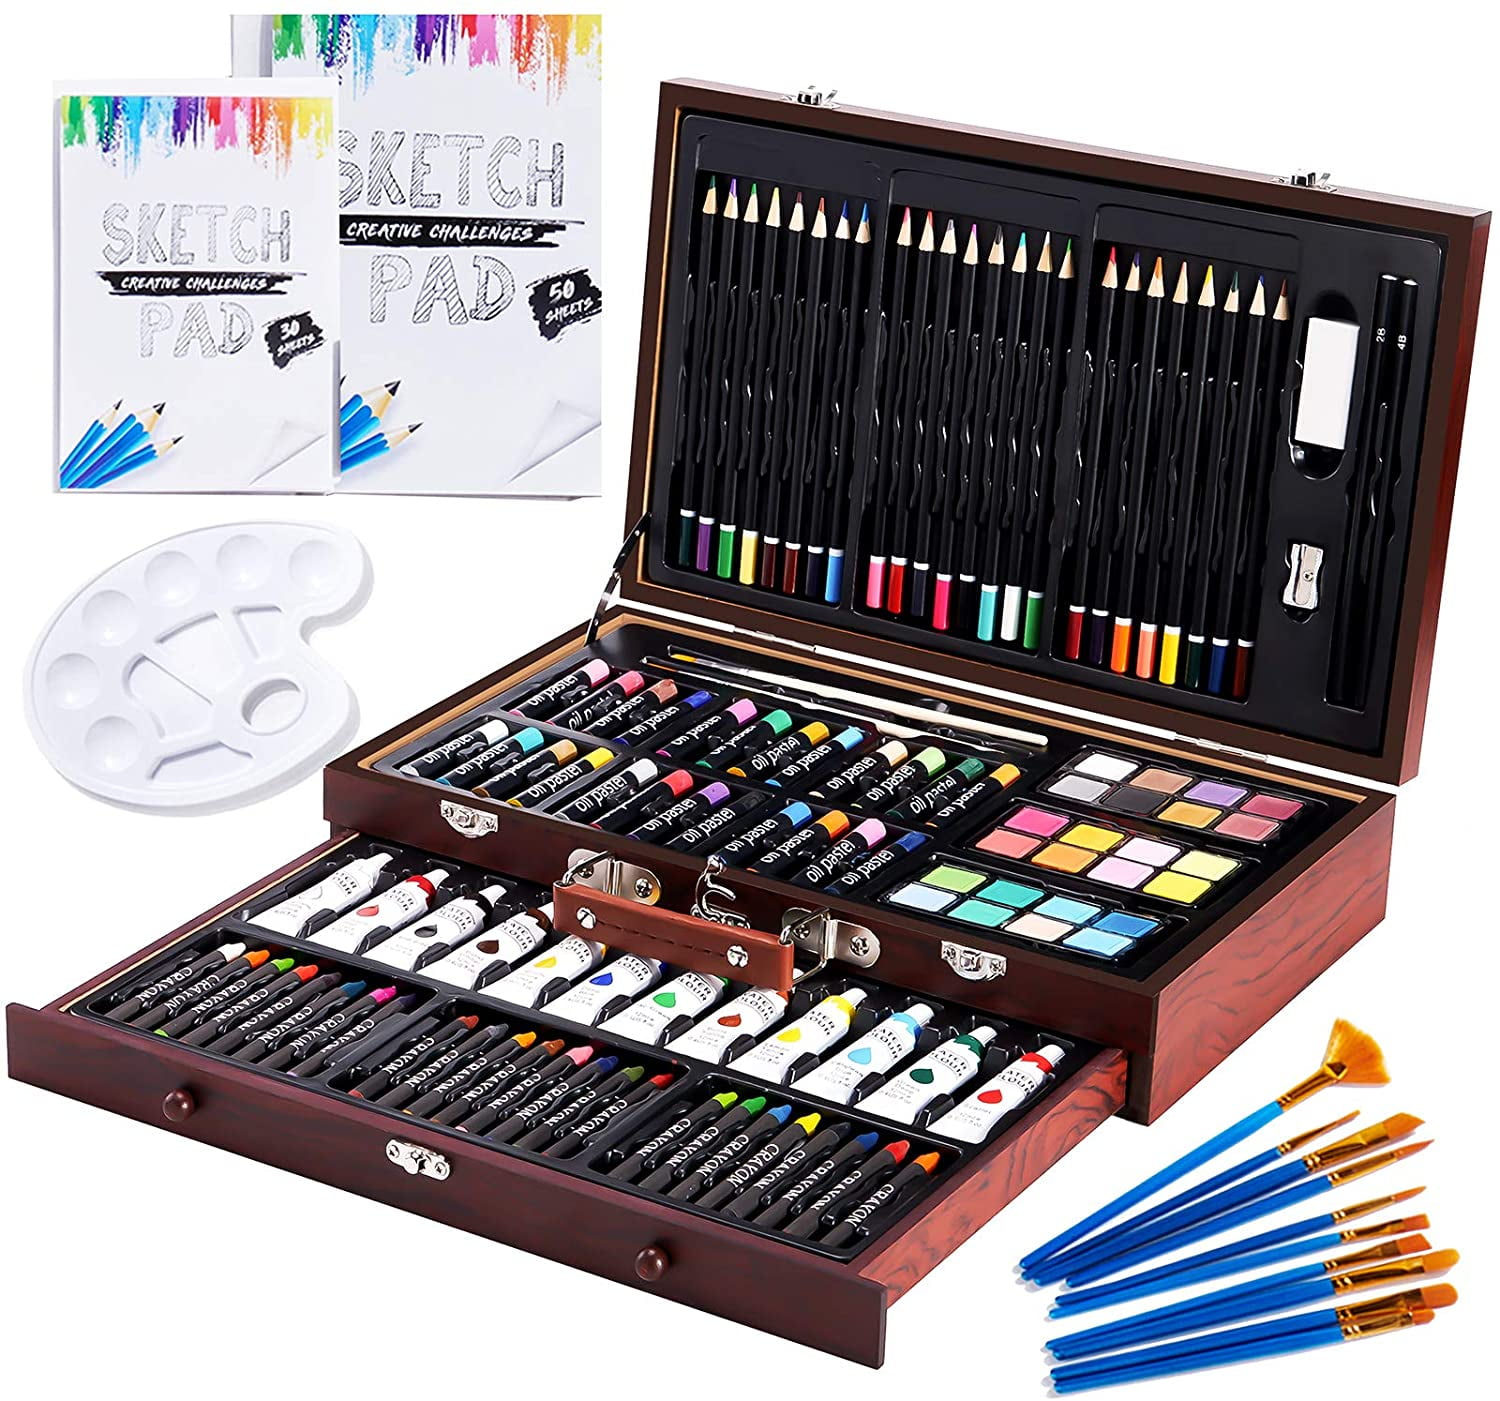 Art Supplies 85 Piece, Vigorfun Deluxe Wooden Art Set Crafts Drawing  Painting Kit with 2 Sketch Pads, Oil Pastels, Acrylic, Watercolor Paints